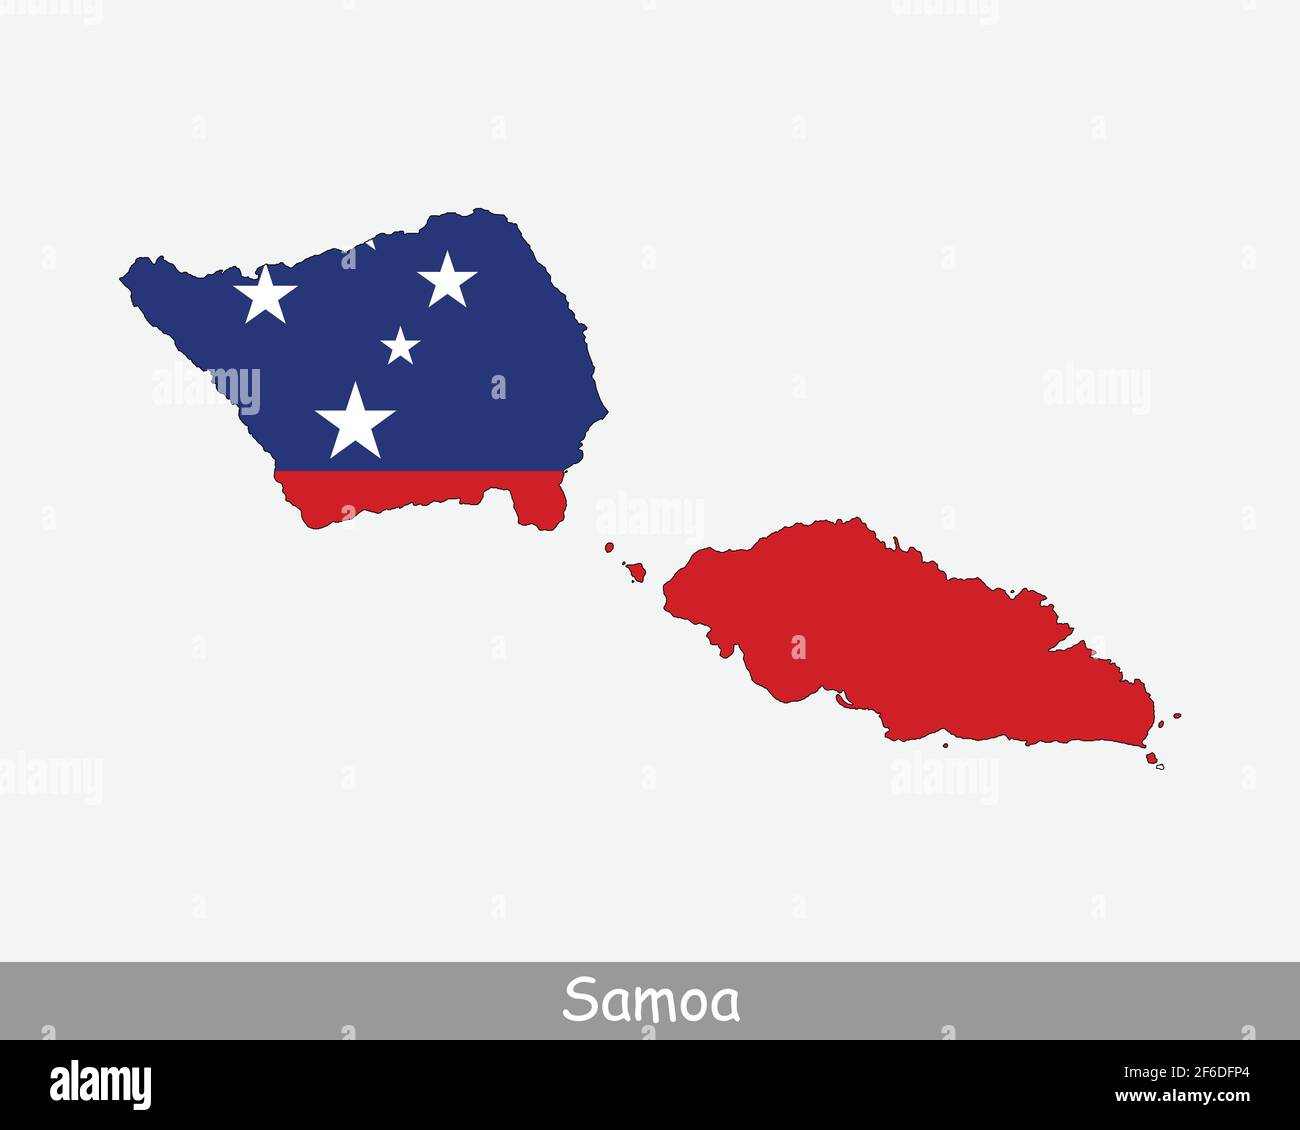 Samoa Flag Map. Map of the Independent State of Samoa with the Samoan national flag isolated on a white background. Vector Illustration. Stock Vector